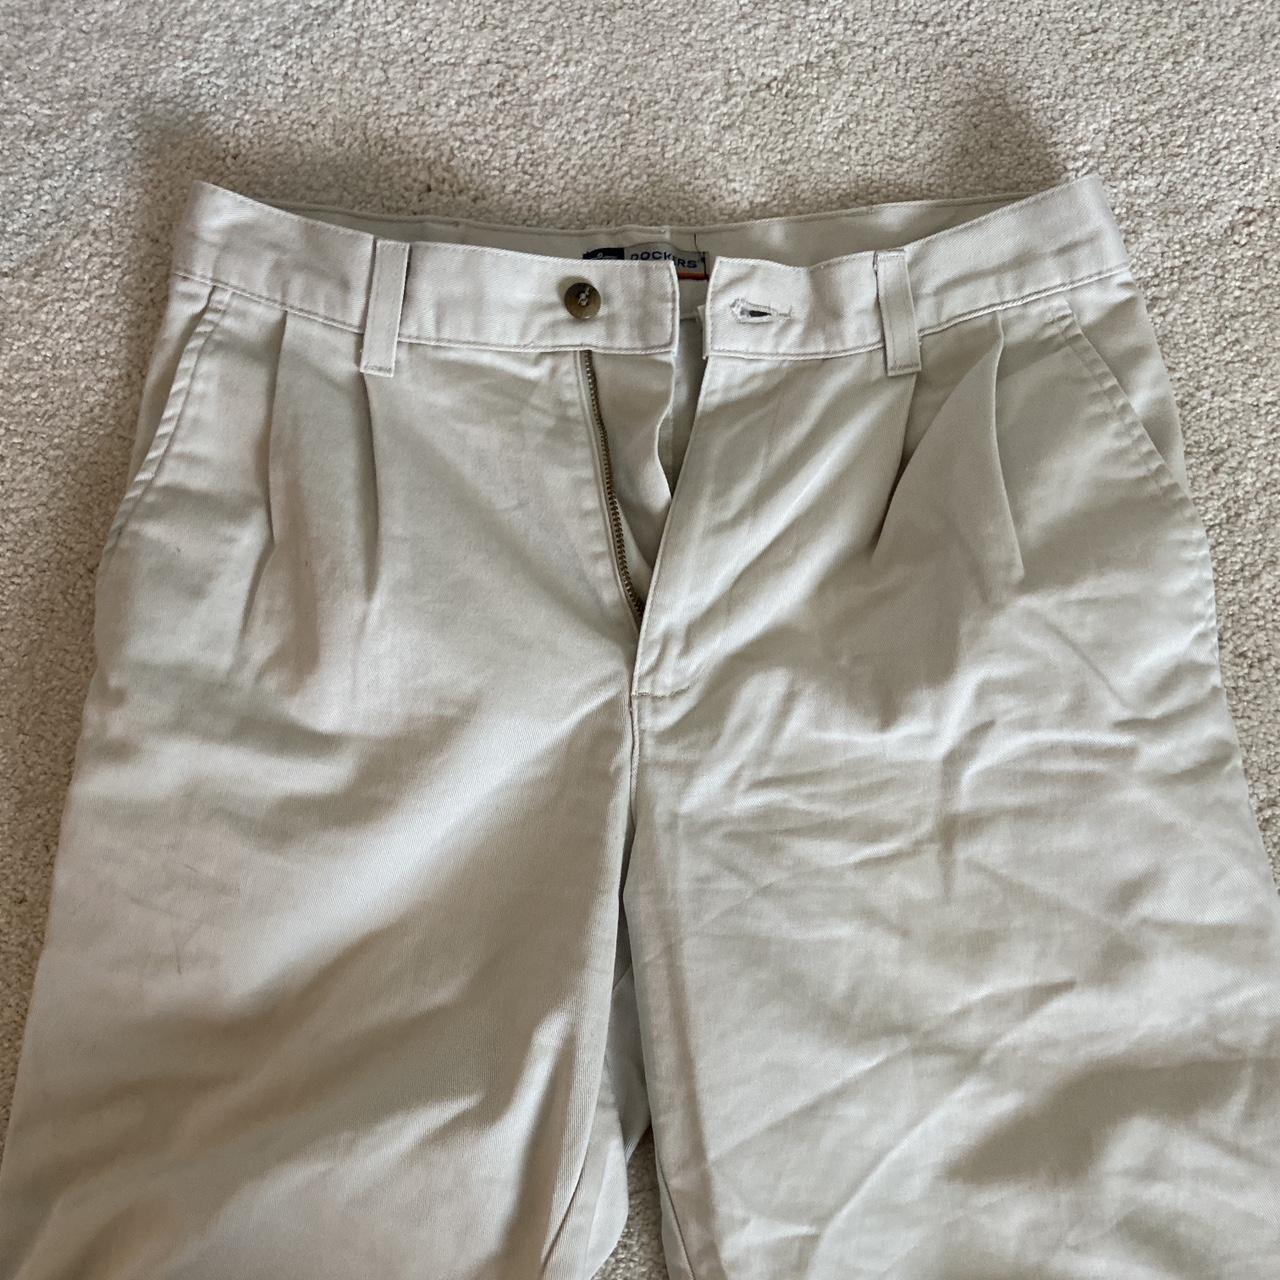 Dockers Women's White and Cream Trousers | Depop